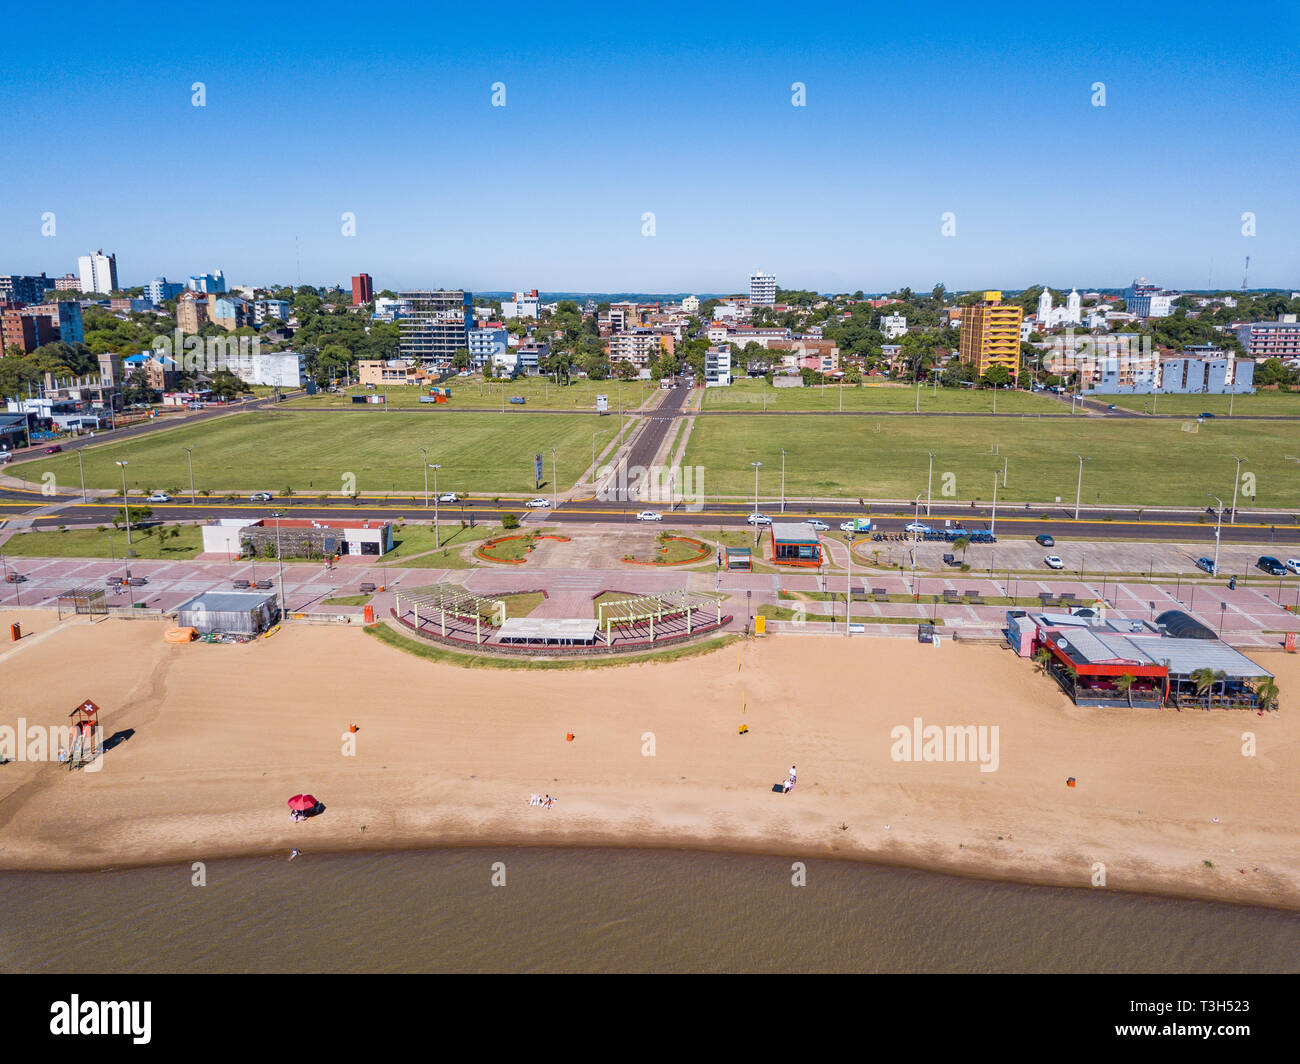 Aerial view of Encarnacion in Paraguay overlooking the San Jose beach. Stock Photo